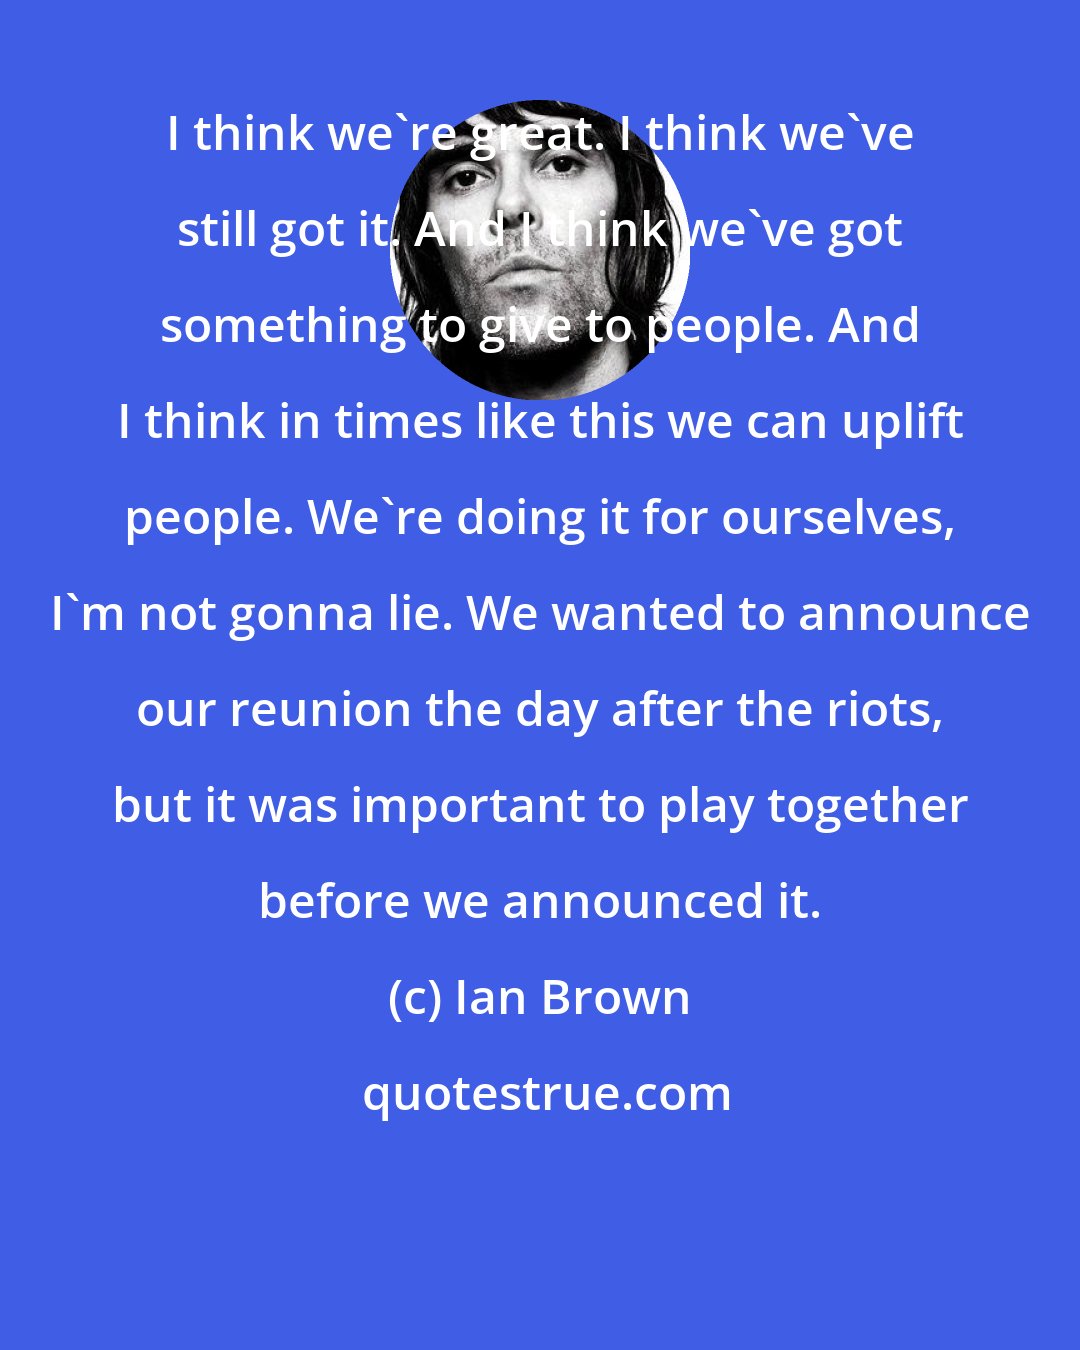 Ian Brown: I think we're great. I think we've still got it. And I think we've got something to give to people. And I think in times like this we can uplift people. We're doing it for ourselves, I'm not gonna lie. We wanted to announce our reunion the day after the riots, but it was important to play together before we announced it.